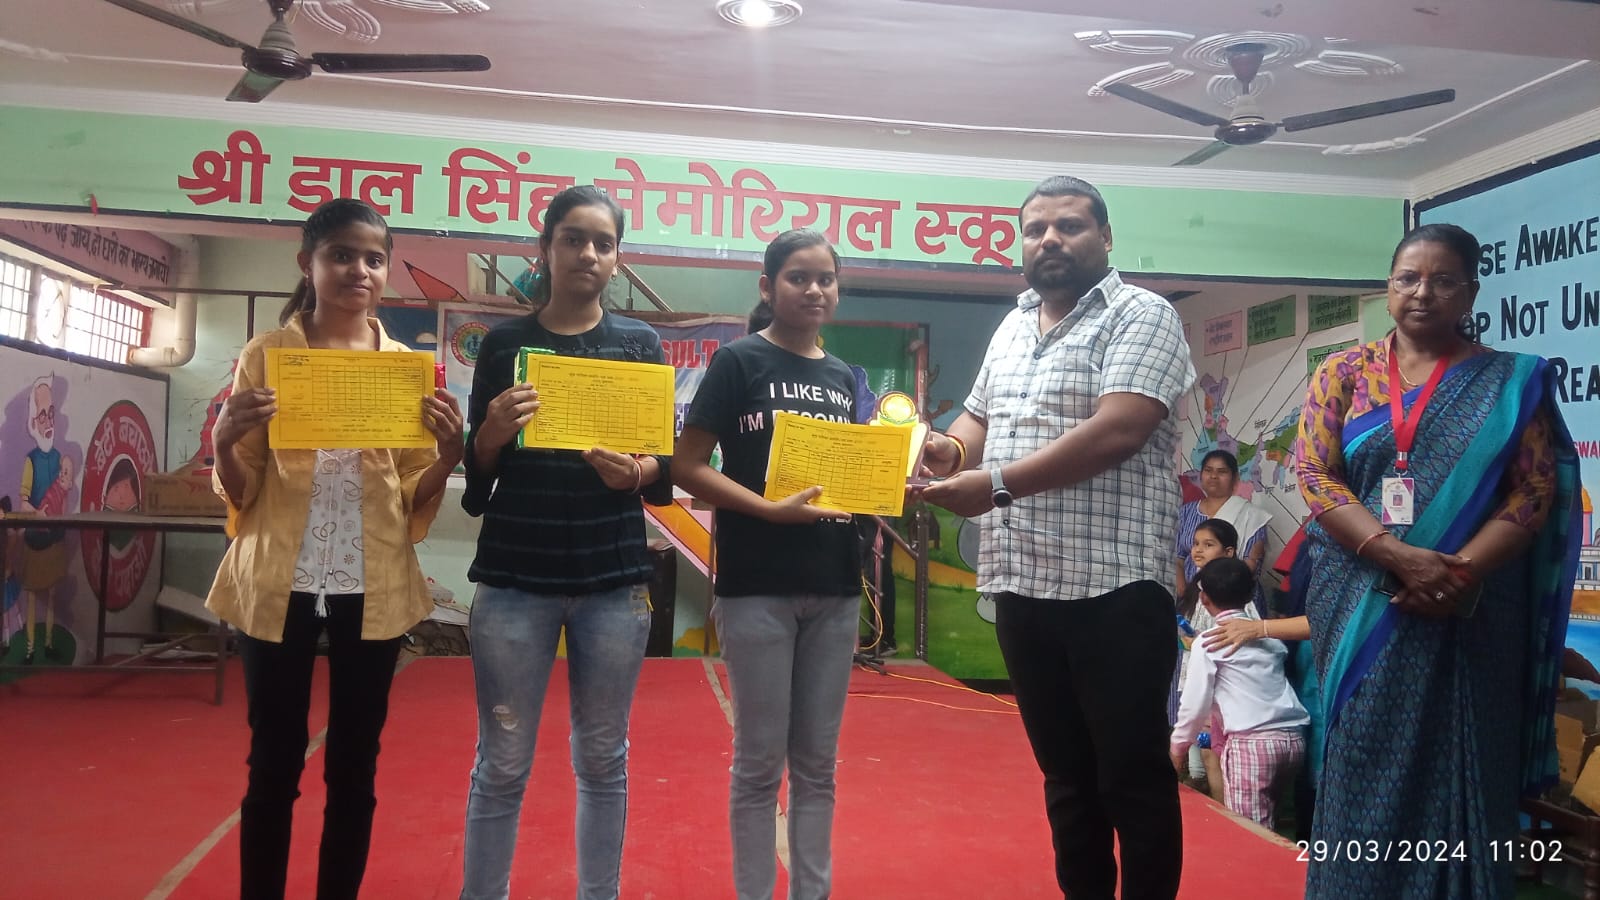 Examination results declared: Meritorious students received certificates and awards for morale.